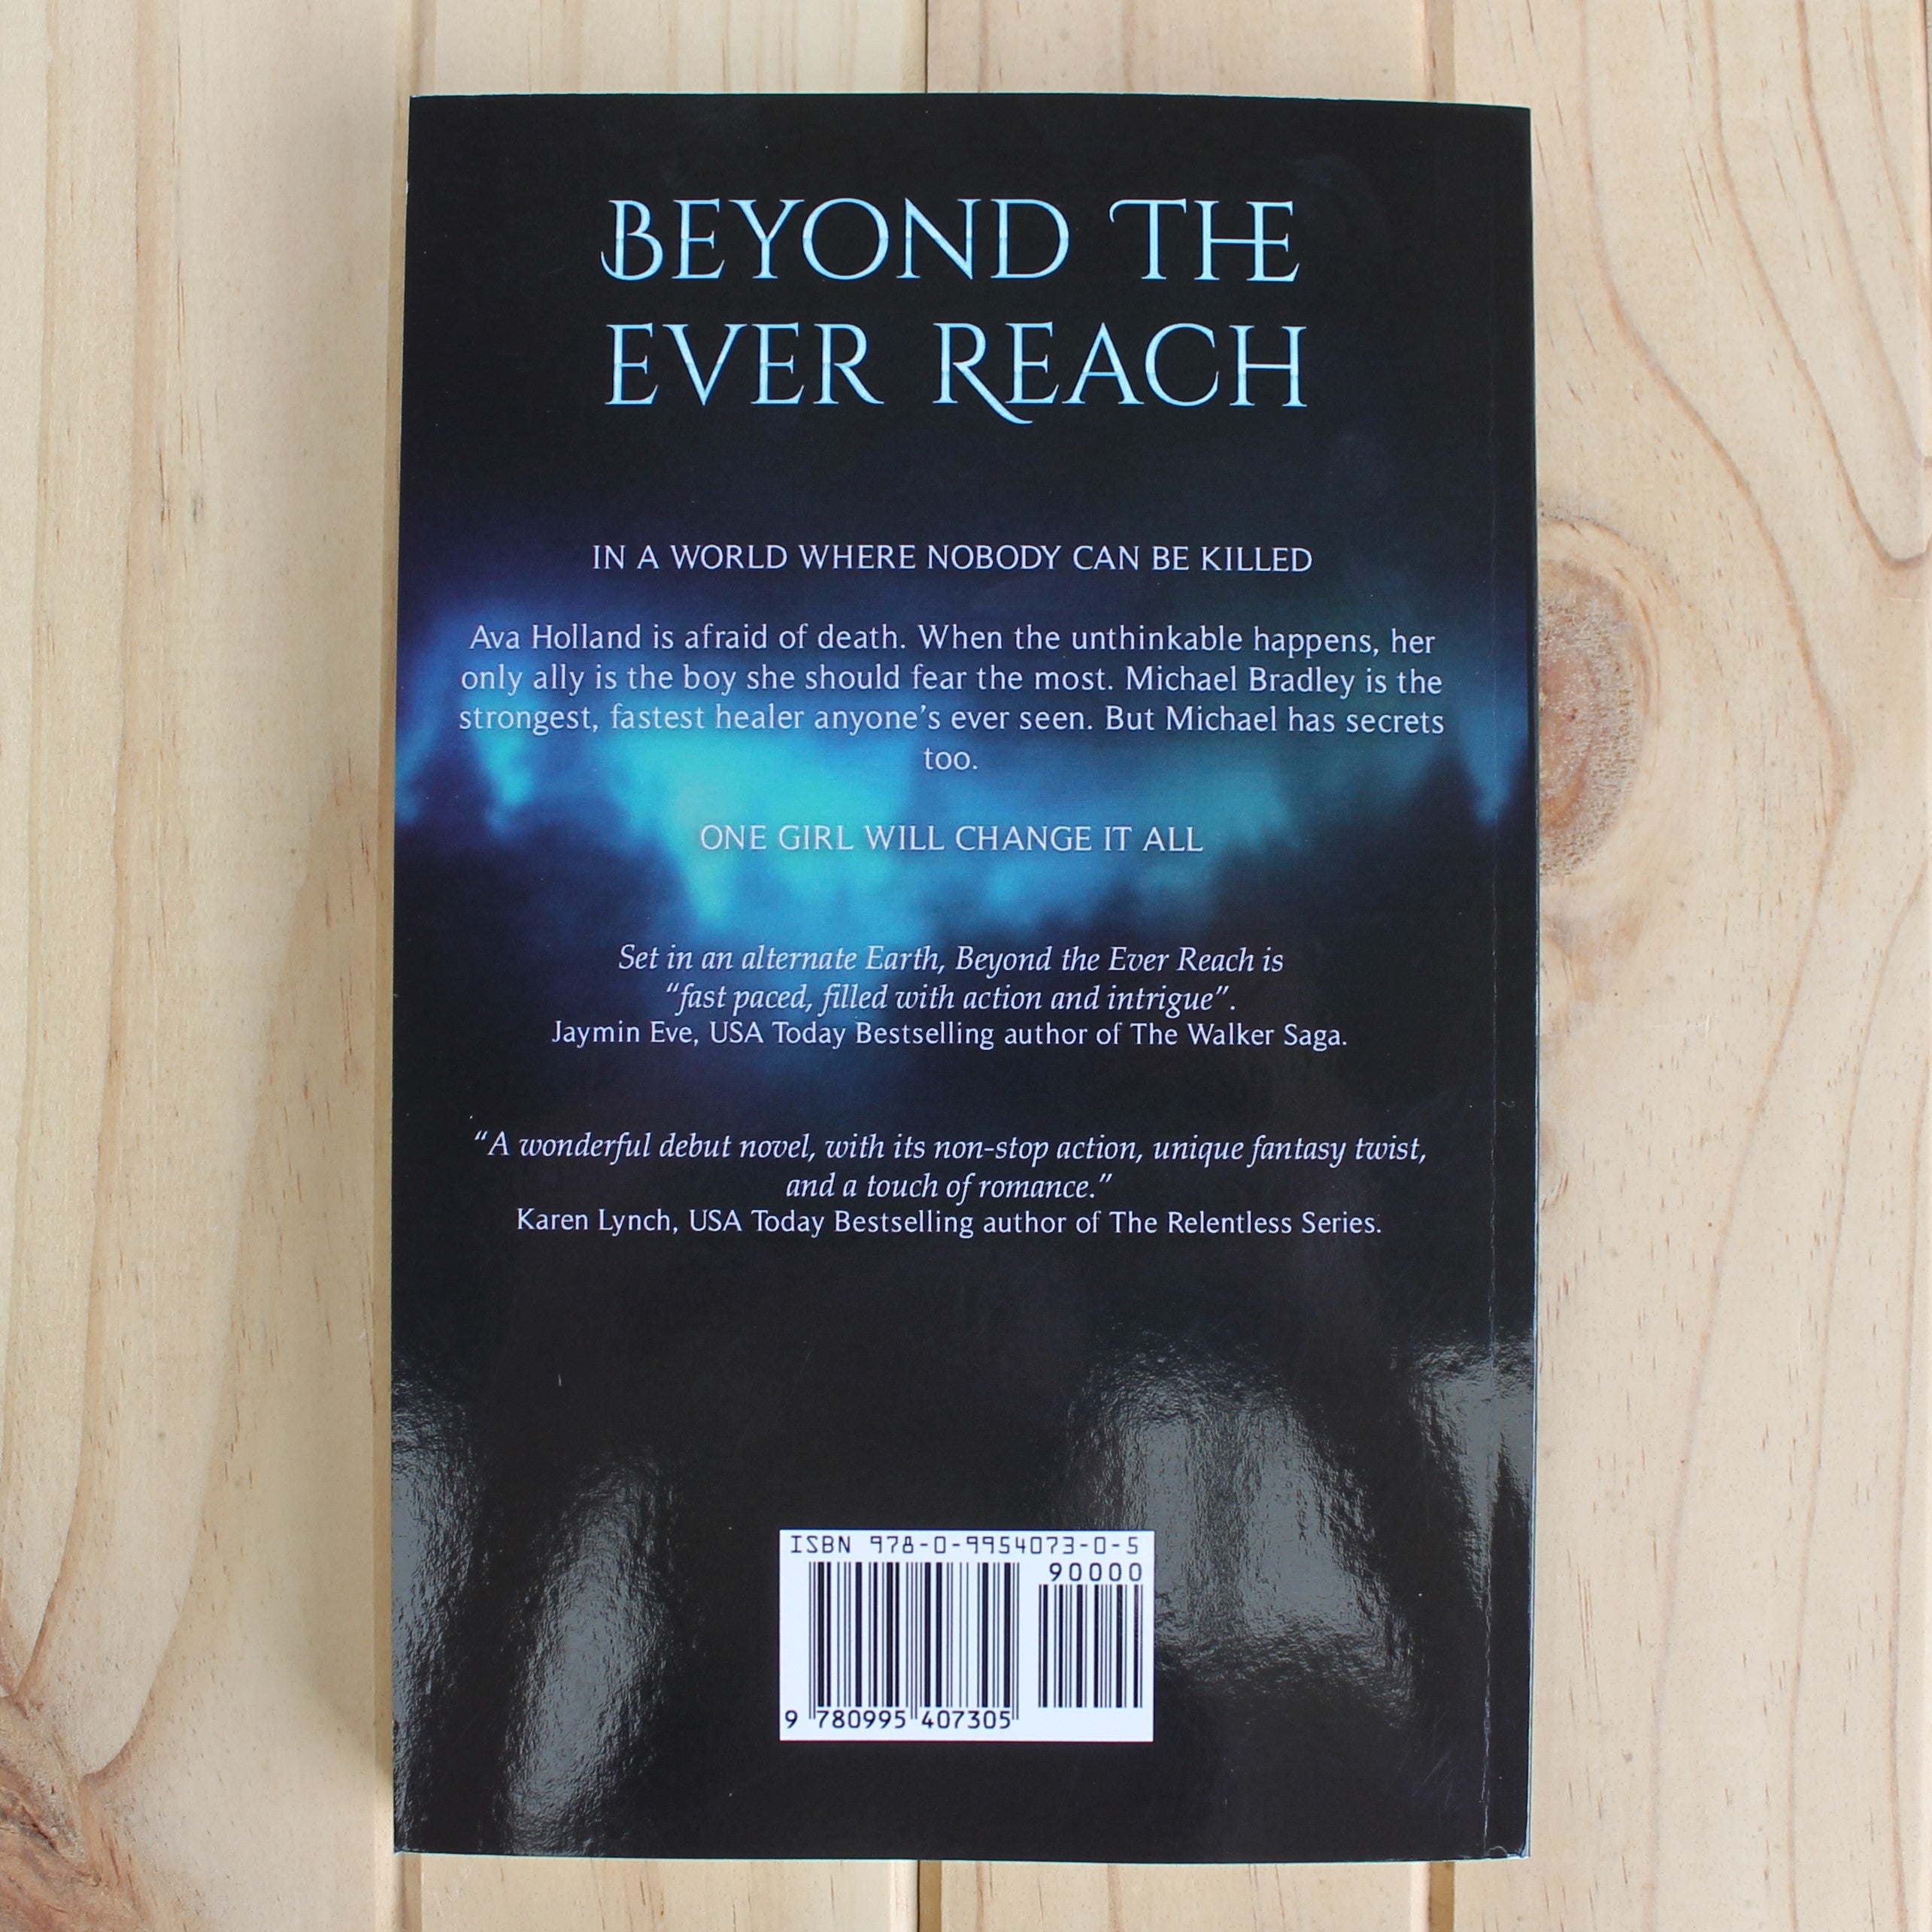 Beyond the Ever Reach by Everly Frost